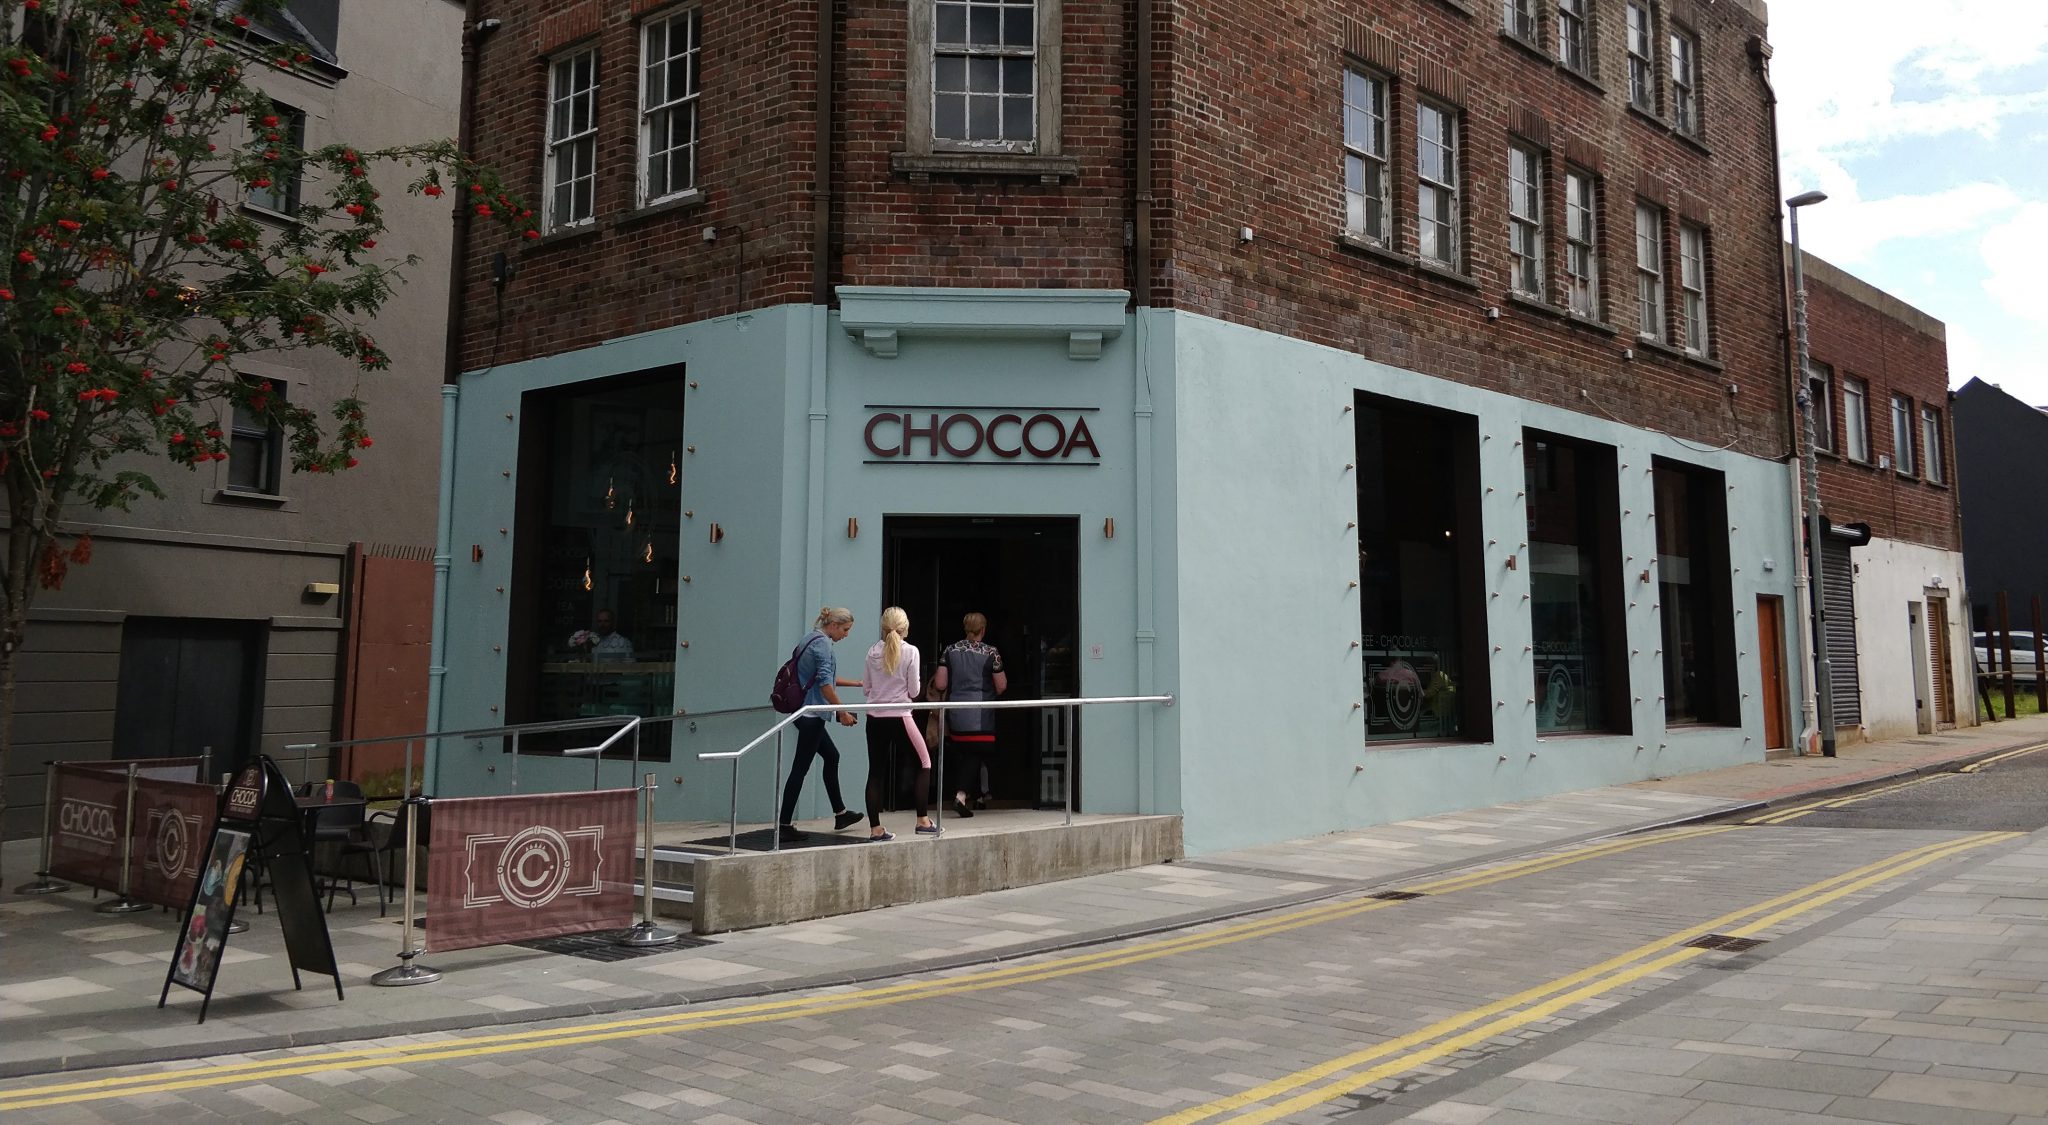 Chocoa moves to larger premises on Bryan Street